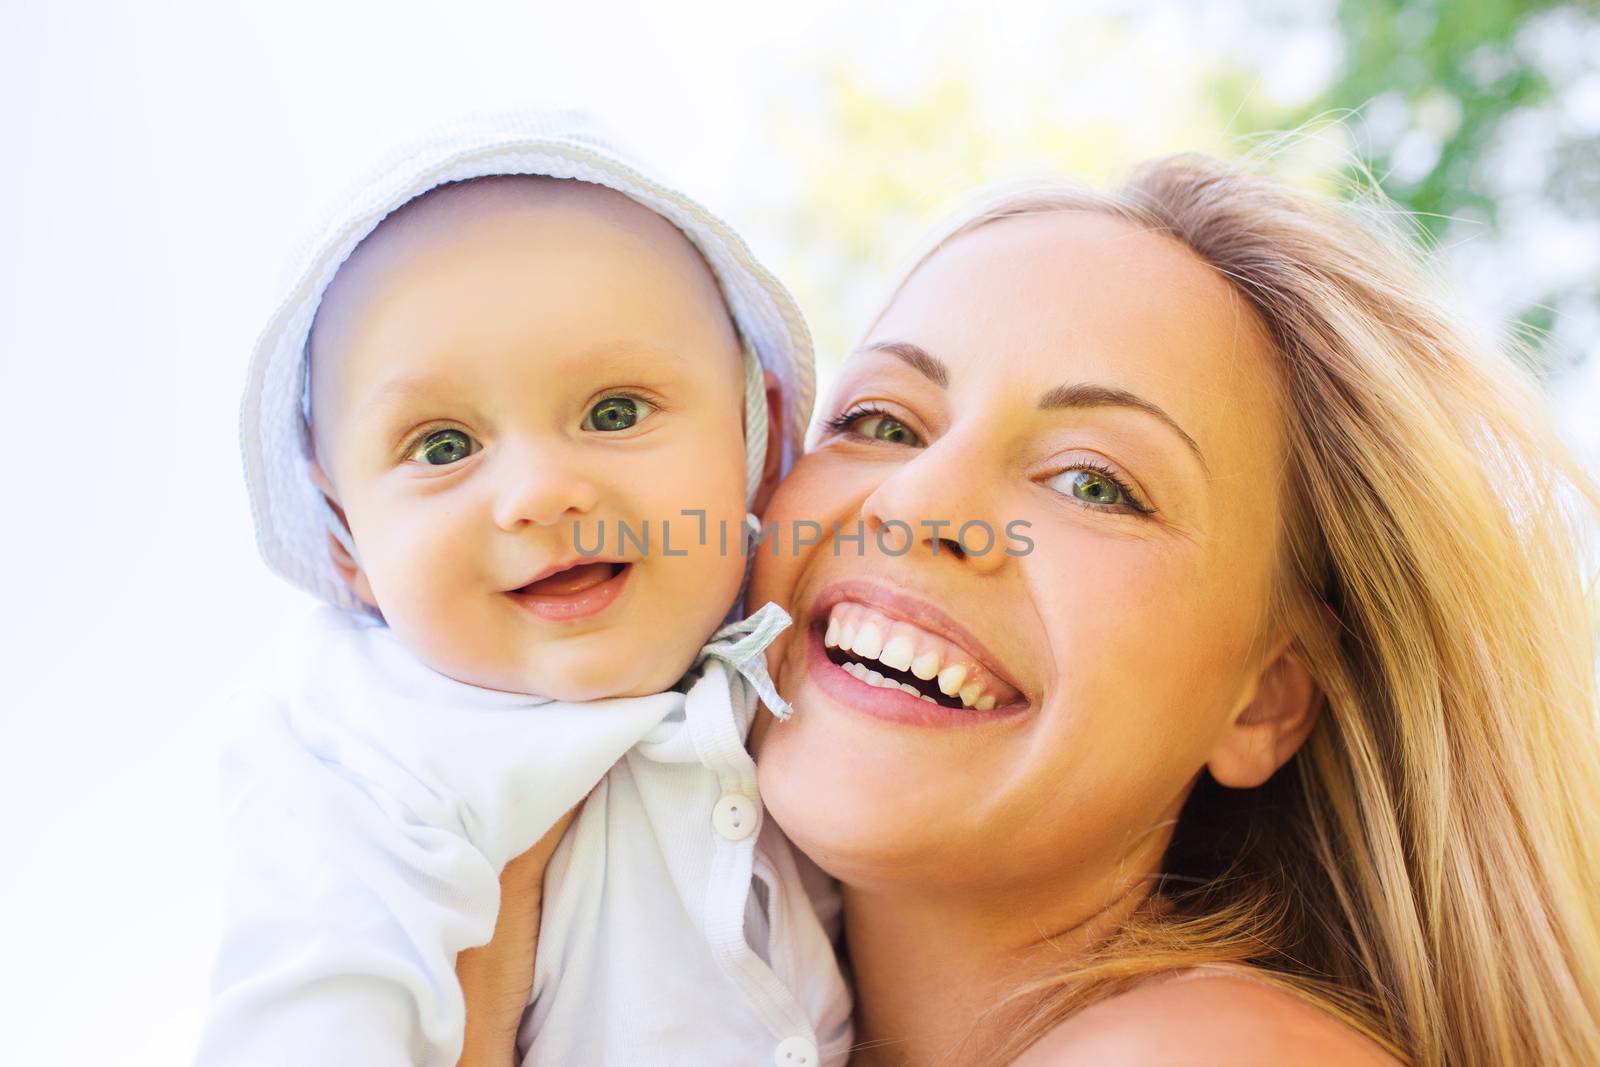 family, child and parenthood concept - happy mother with little baby outdoors